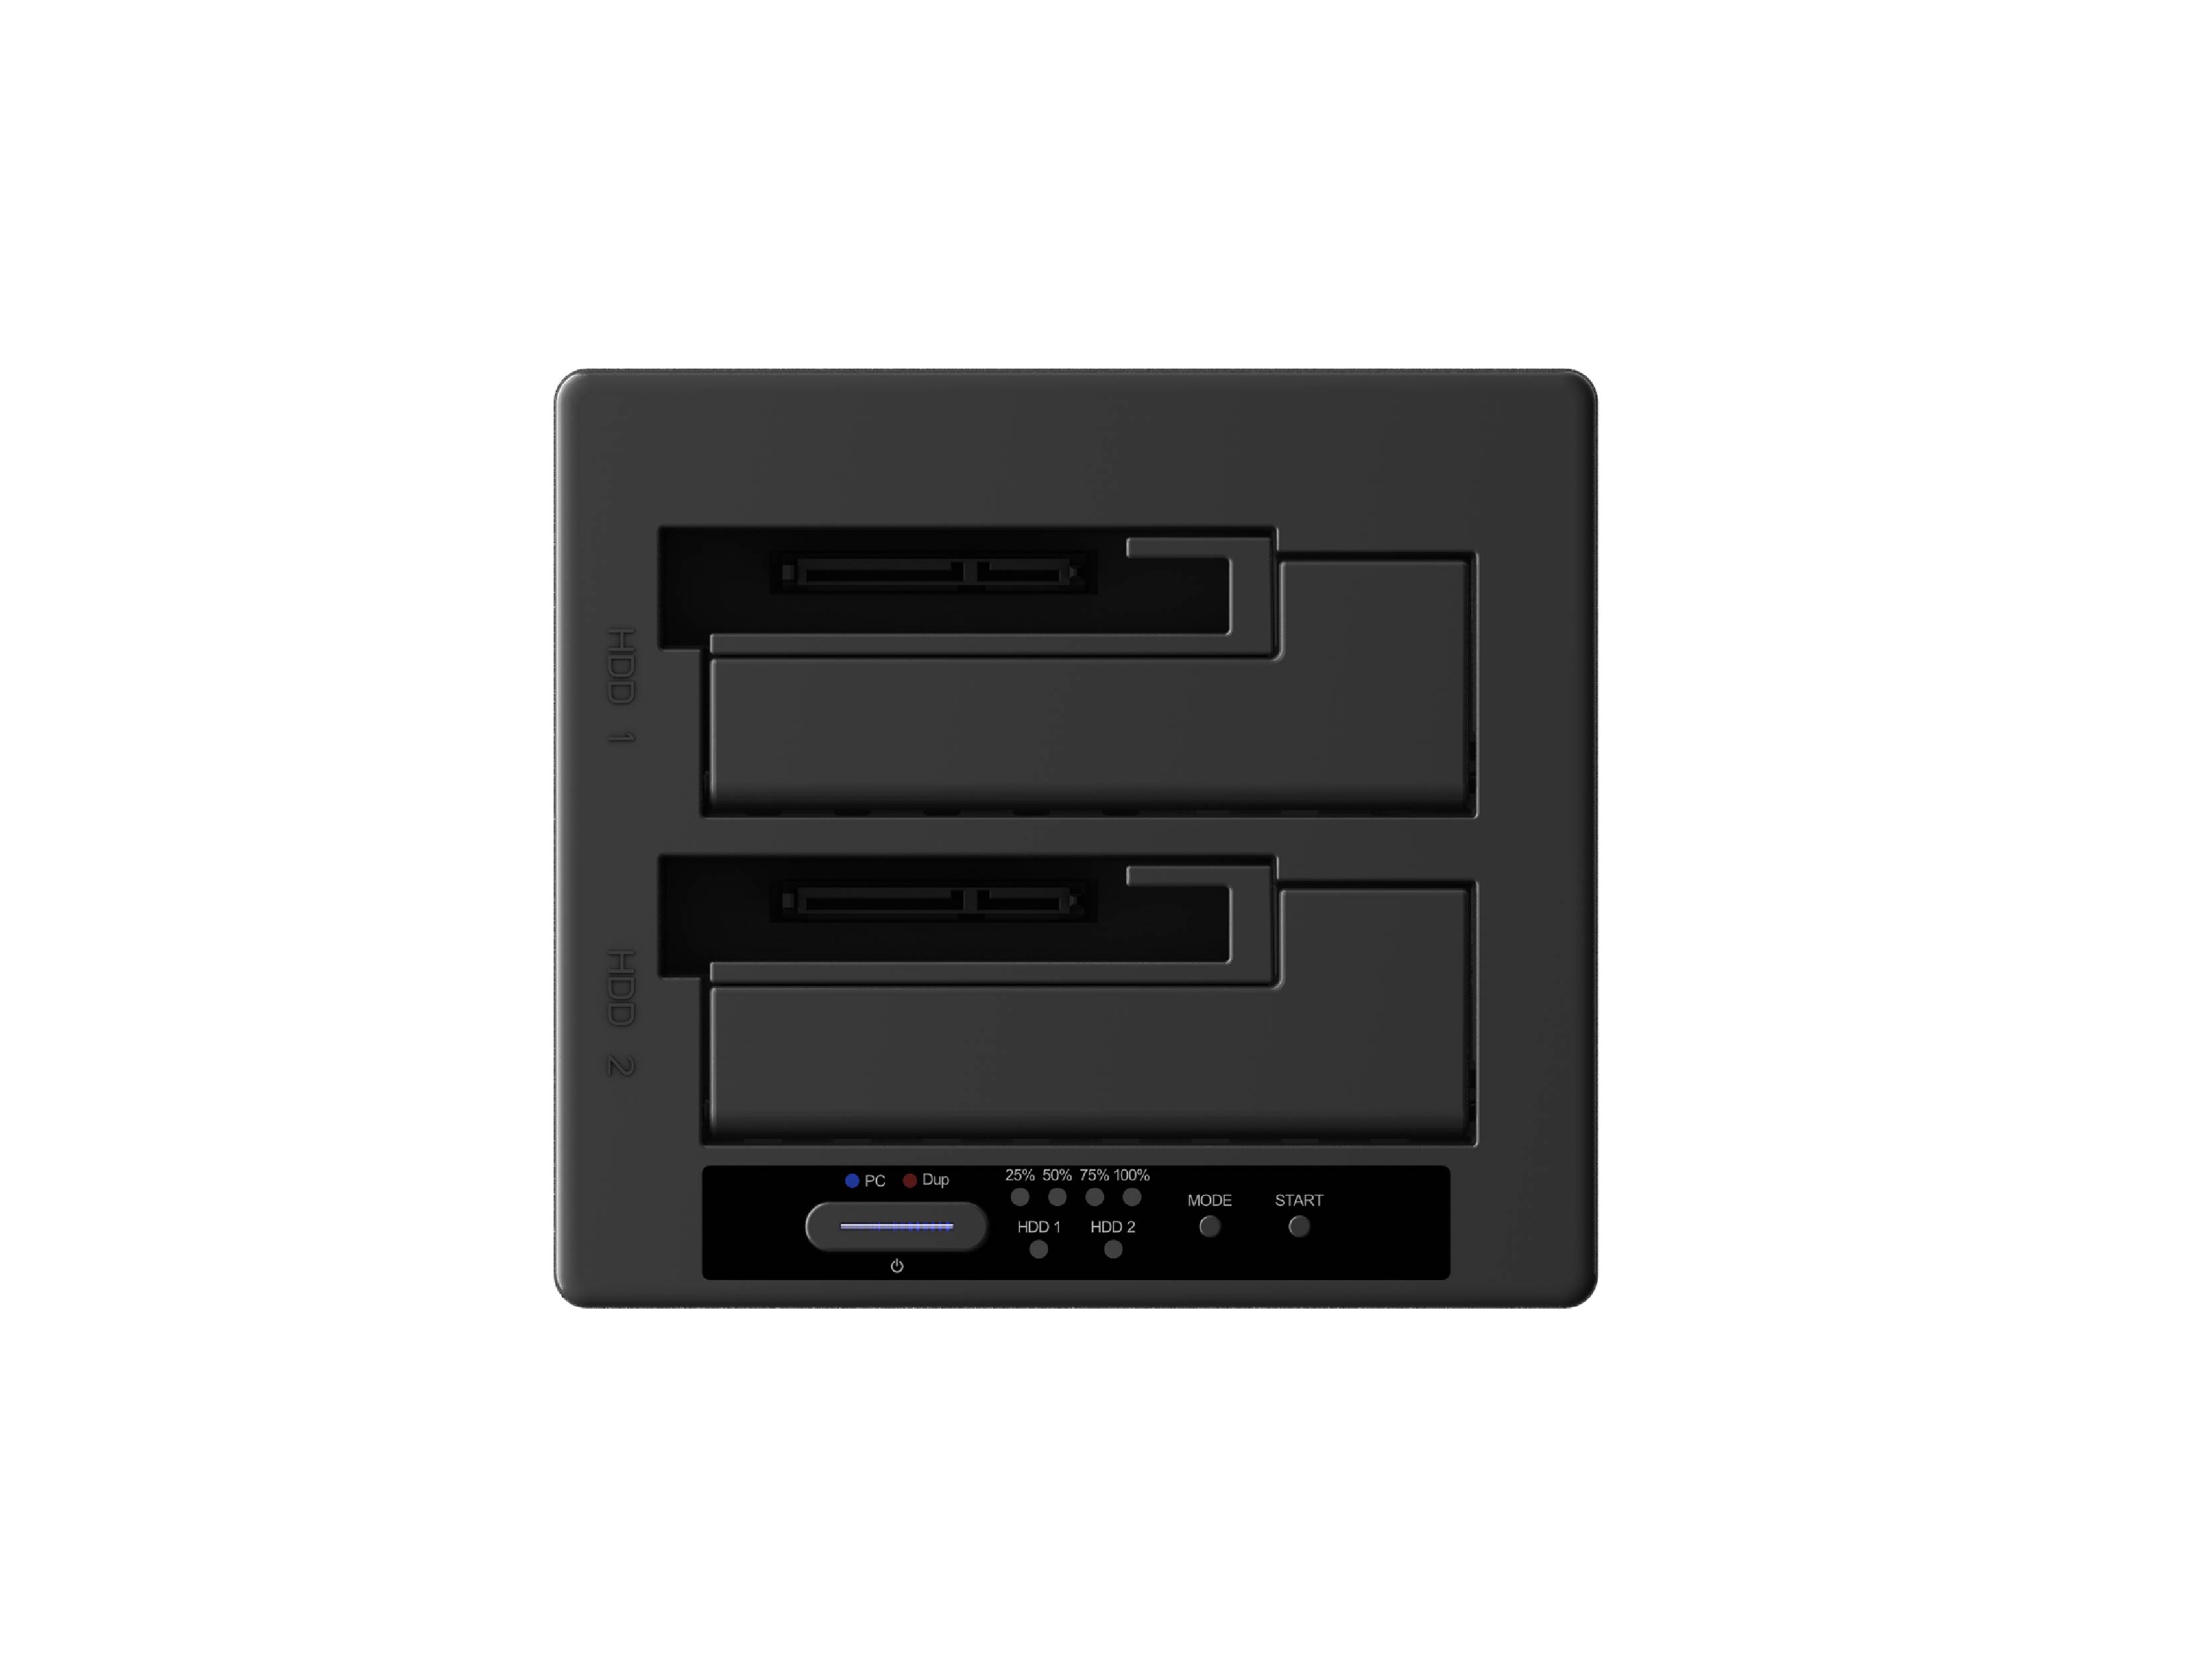 2 Bay SATA SSD/HDD Duplicator (SI-7925US31C-D), applicable 2x 3.5" or 2.5" SATA HDD/SSD, support PC Mode & Clone mode switchable, USB-C 10Gbps to host.